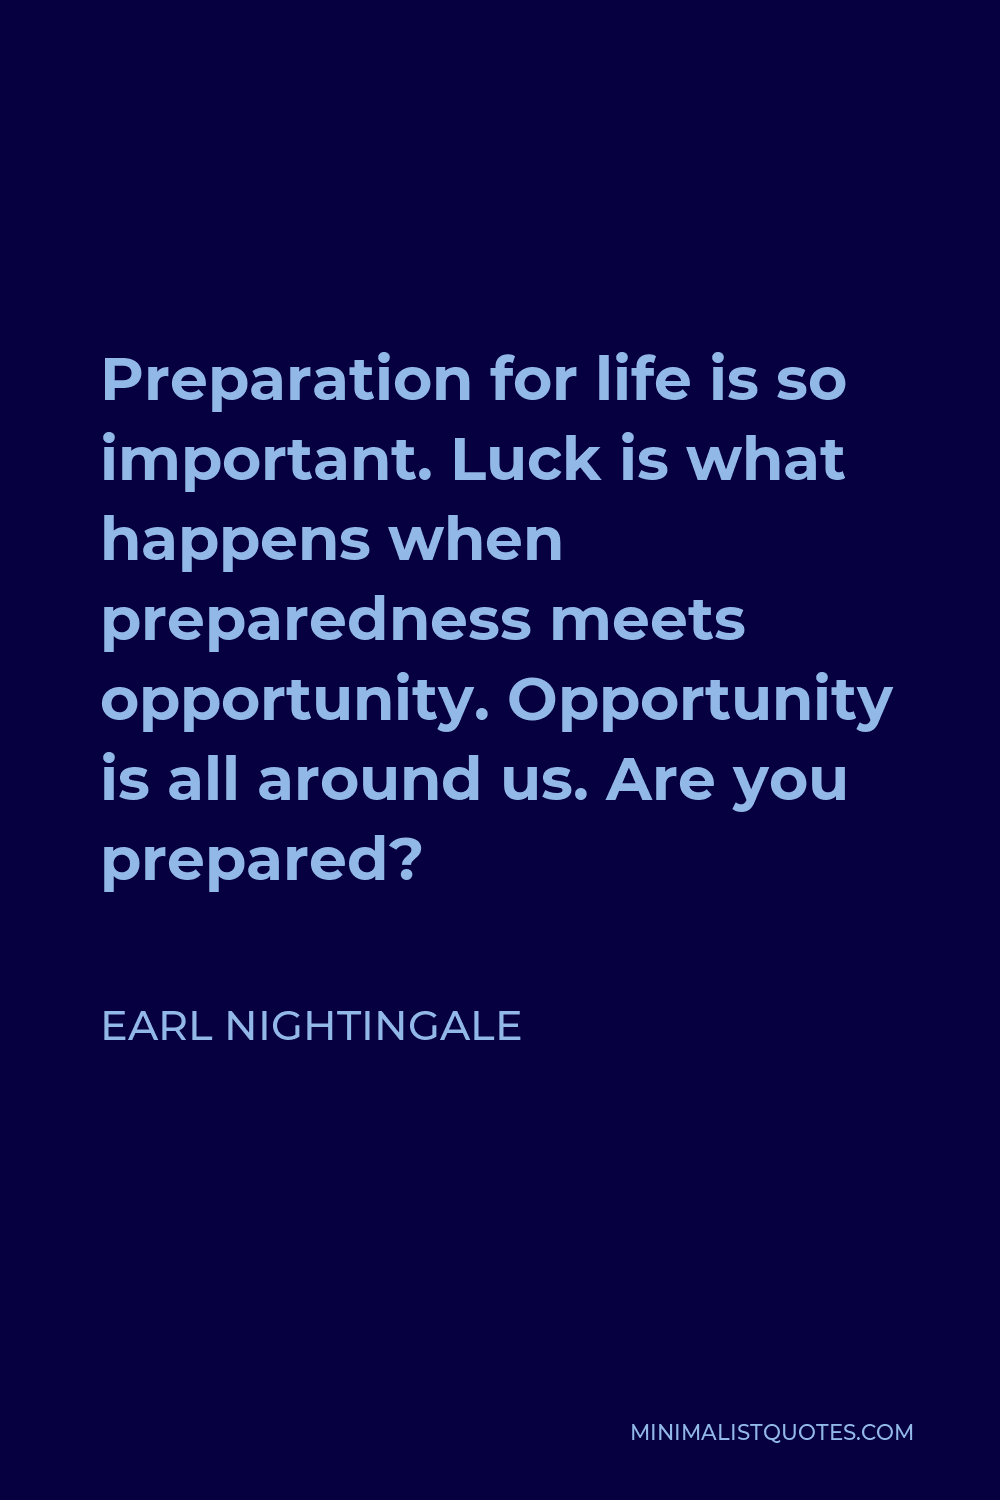 Earl Nightingale Quote - Preparation for life is so important. Luck is what happens when preparedness meets opportunity. Opportunity is all around us. Are you prepared?